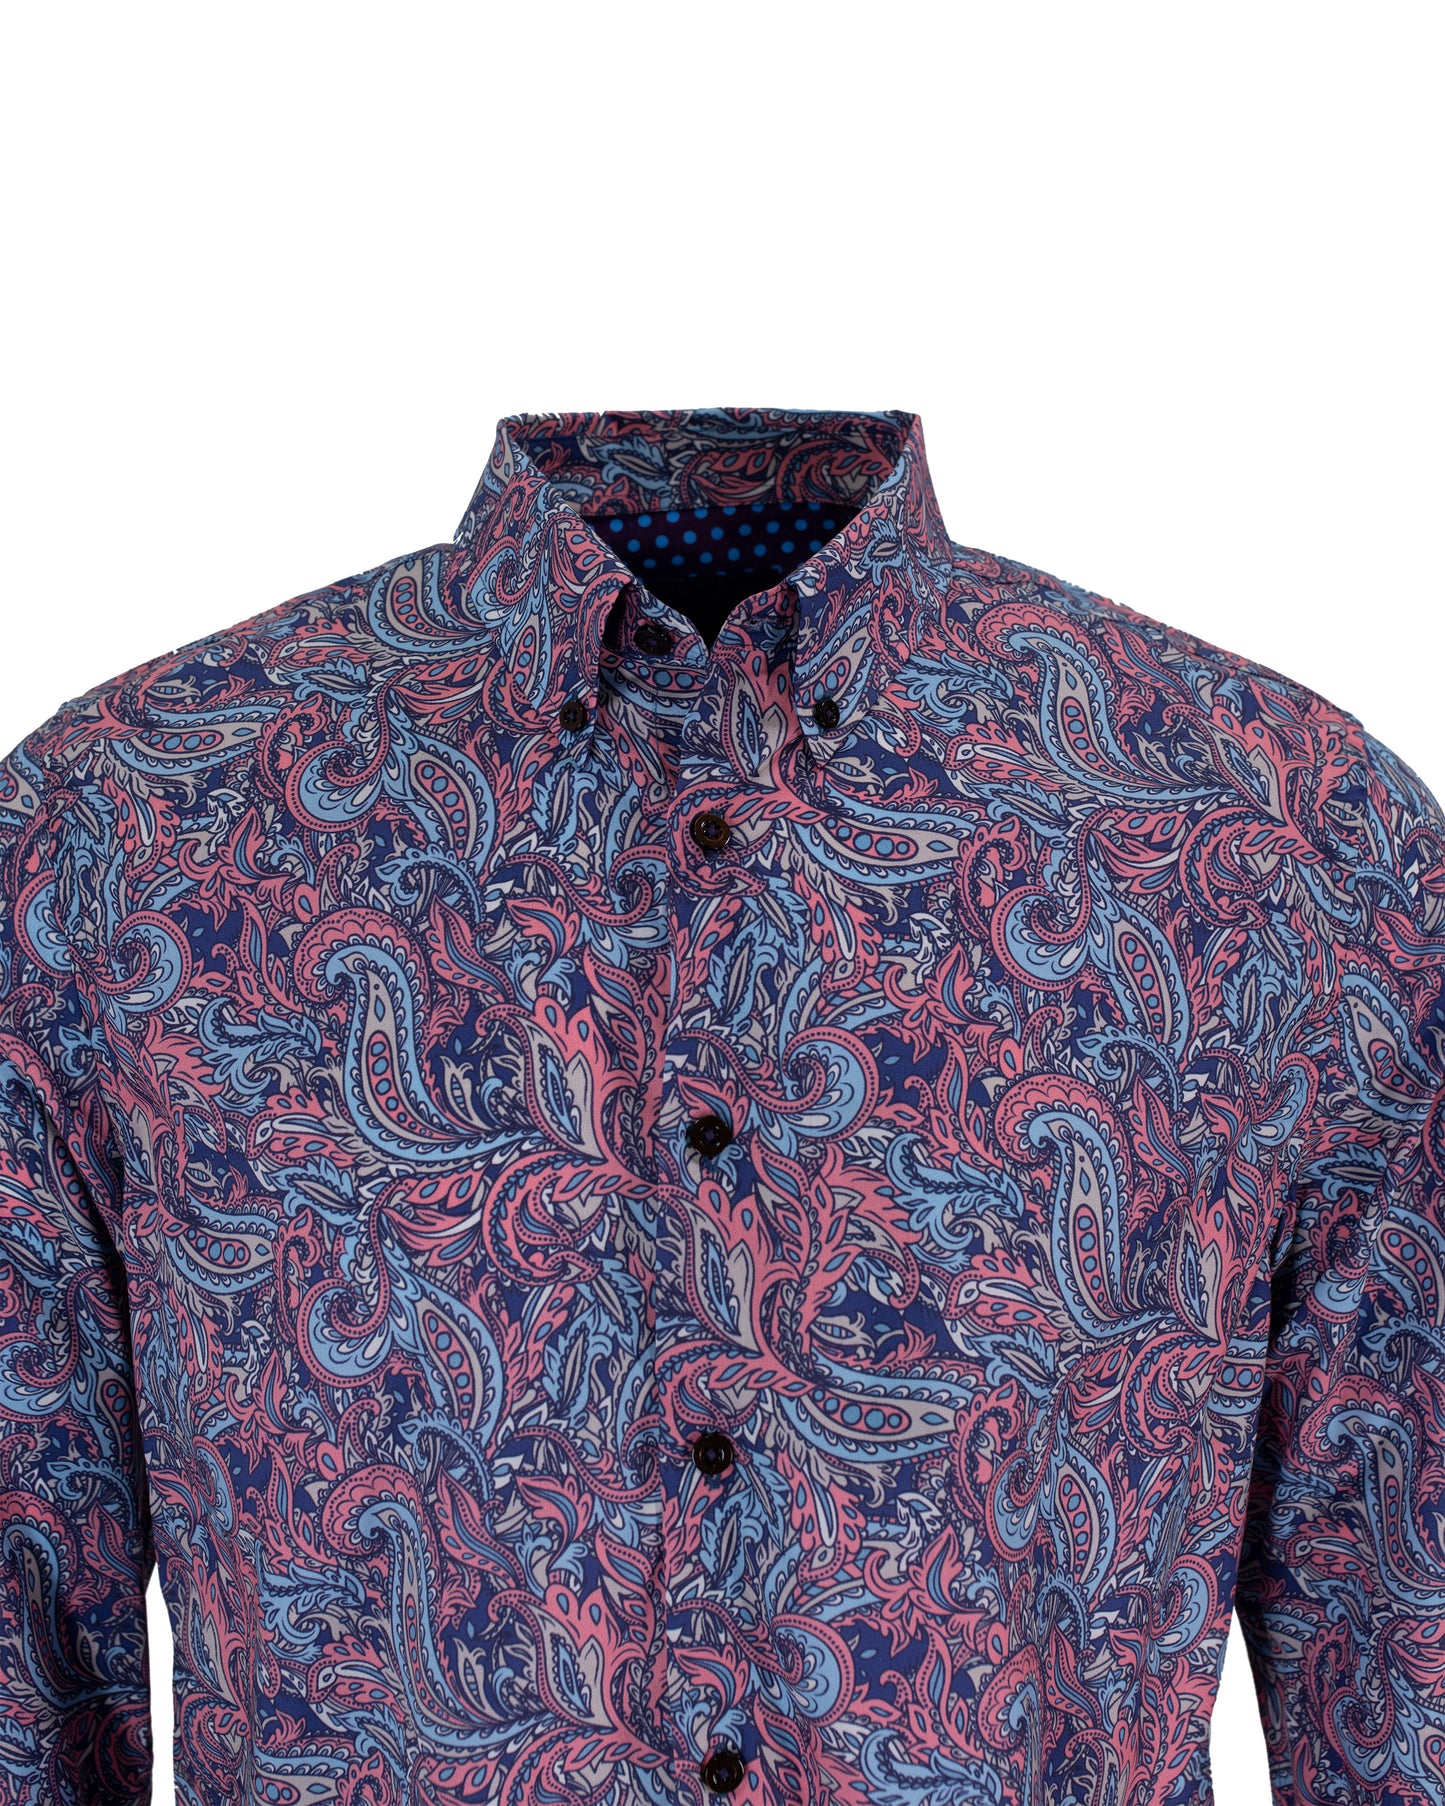 MITCHELL PAISLEY GOAL SHIRT IN STRAWBERRY